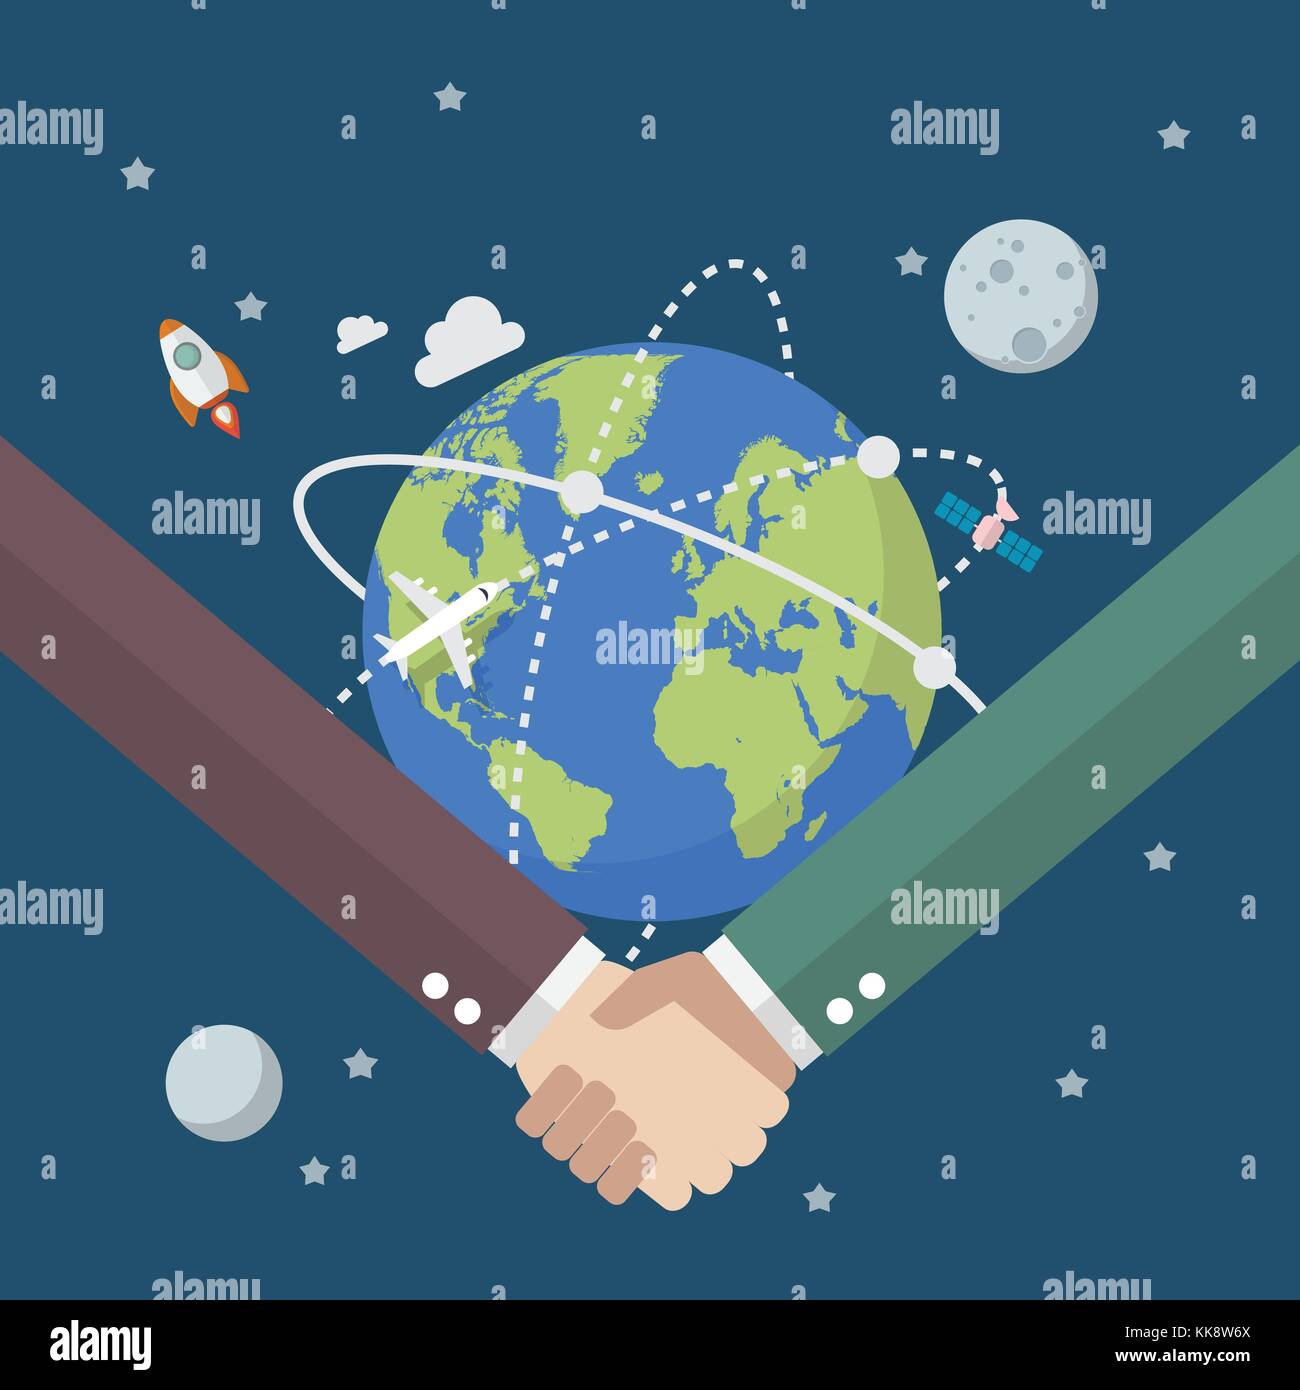 Business people shaking hands on globe. Vector illustration Stock Vector